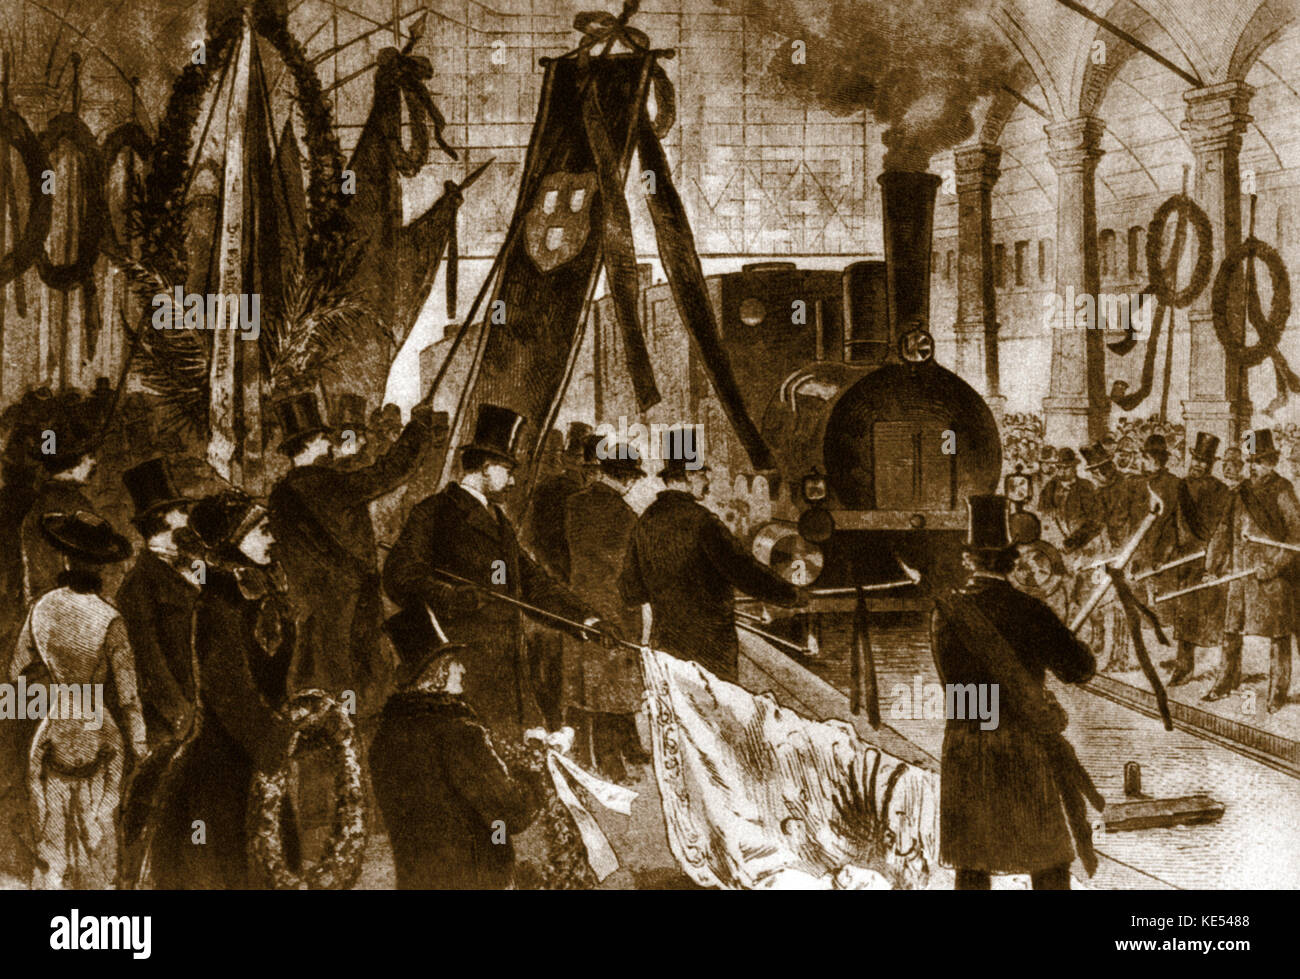 Arrival of Richard Wagner 's coffin - Arrival of Richard Wagner 's coffin at Munich train station, 1883. After a drawing by L. Bechstein. Showing a crowd of his admirers gathering round a train, holding garlands and banners. German composer: 22 May 1813 - 13 February 1883. Tinted version. Stock Photo